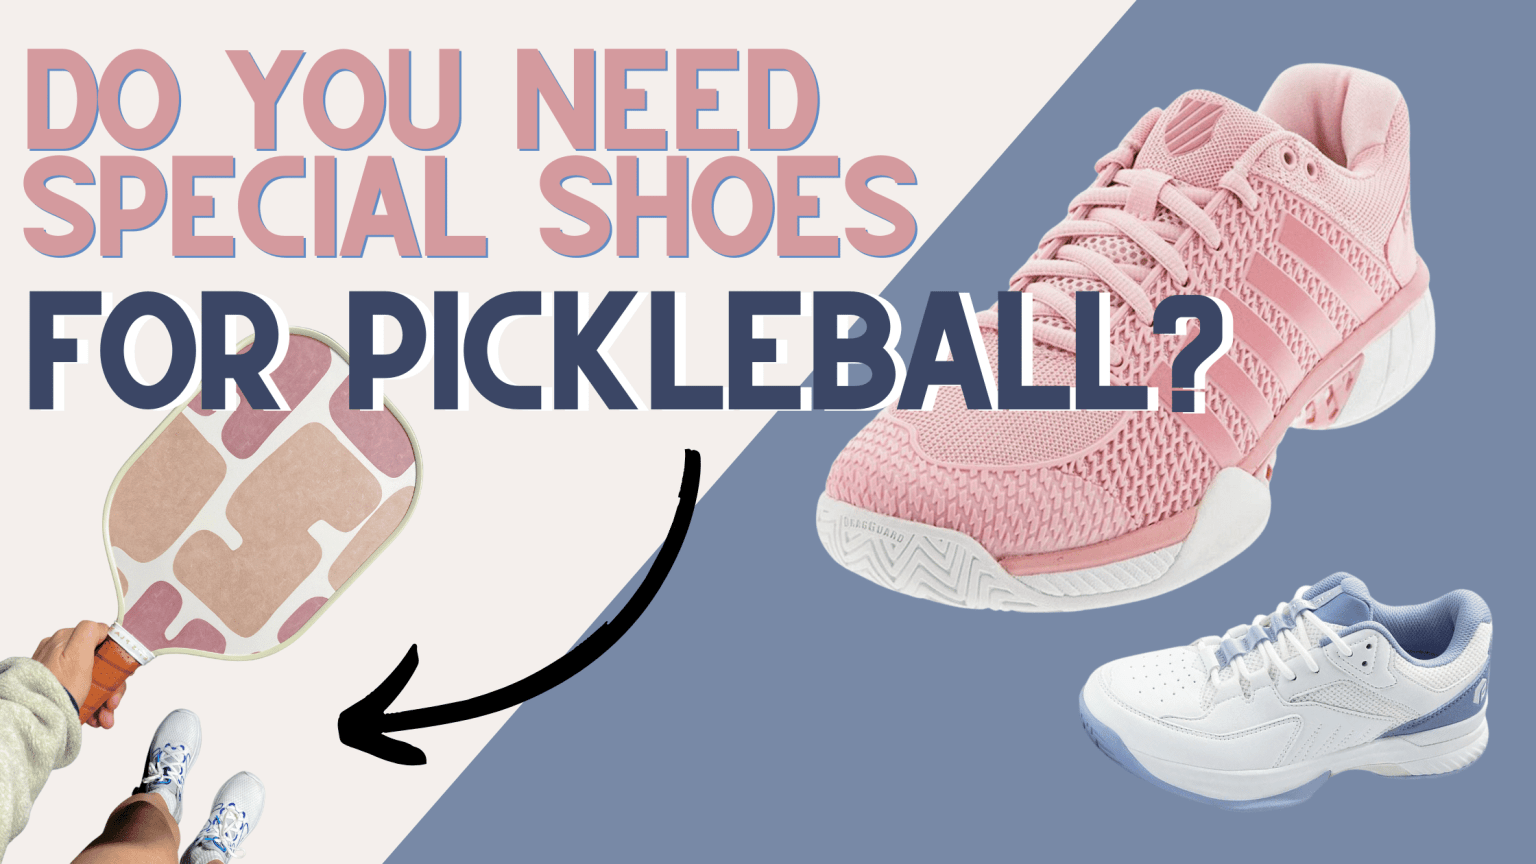 Do you need special shoes for pickleball